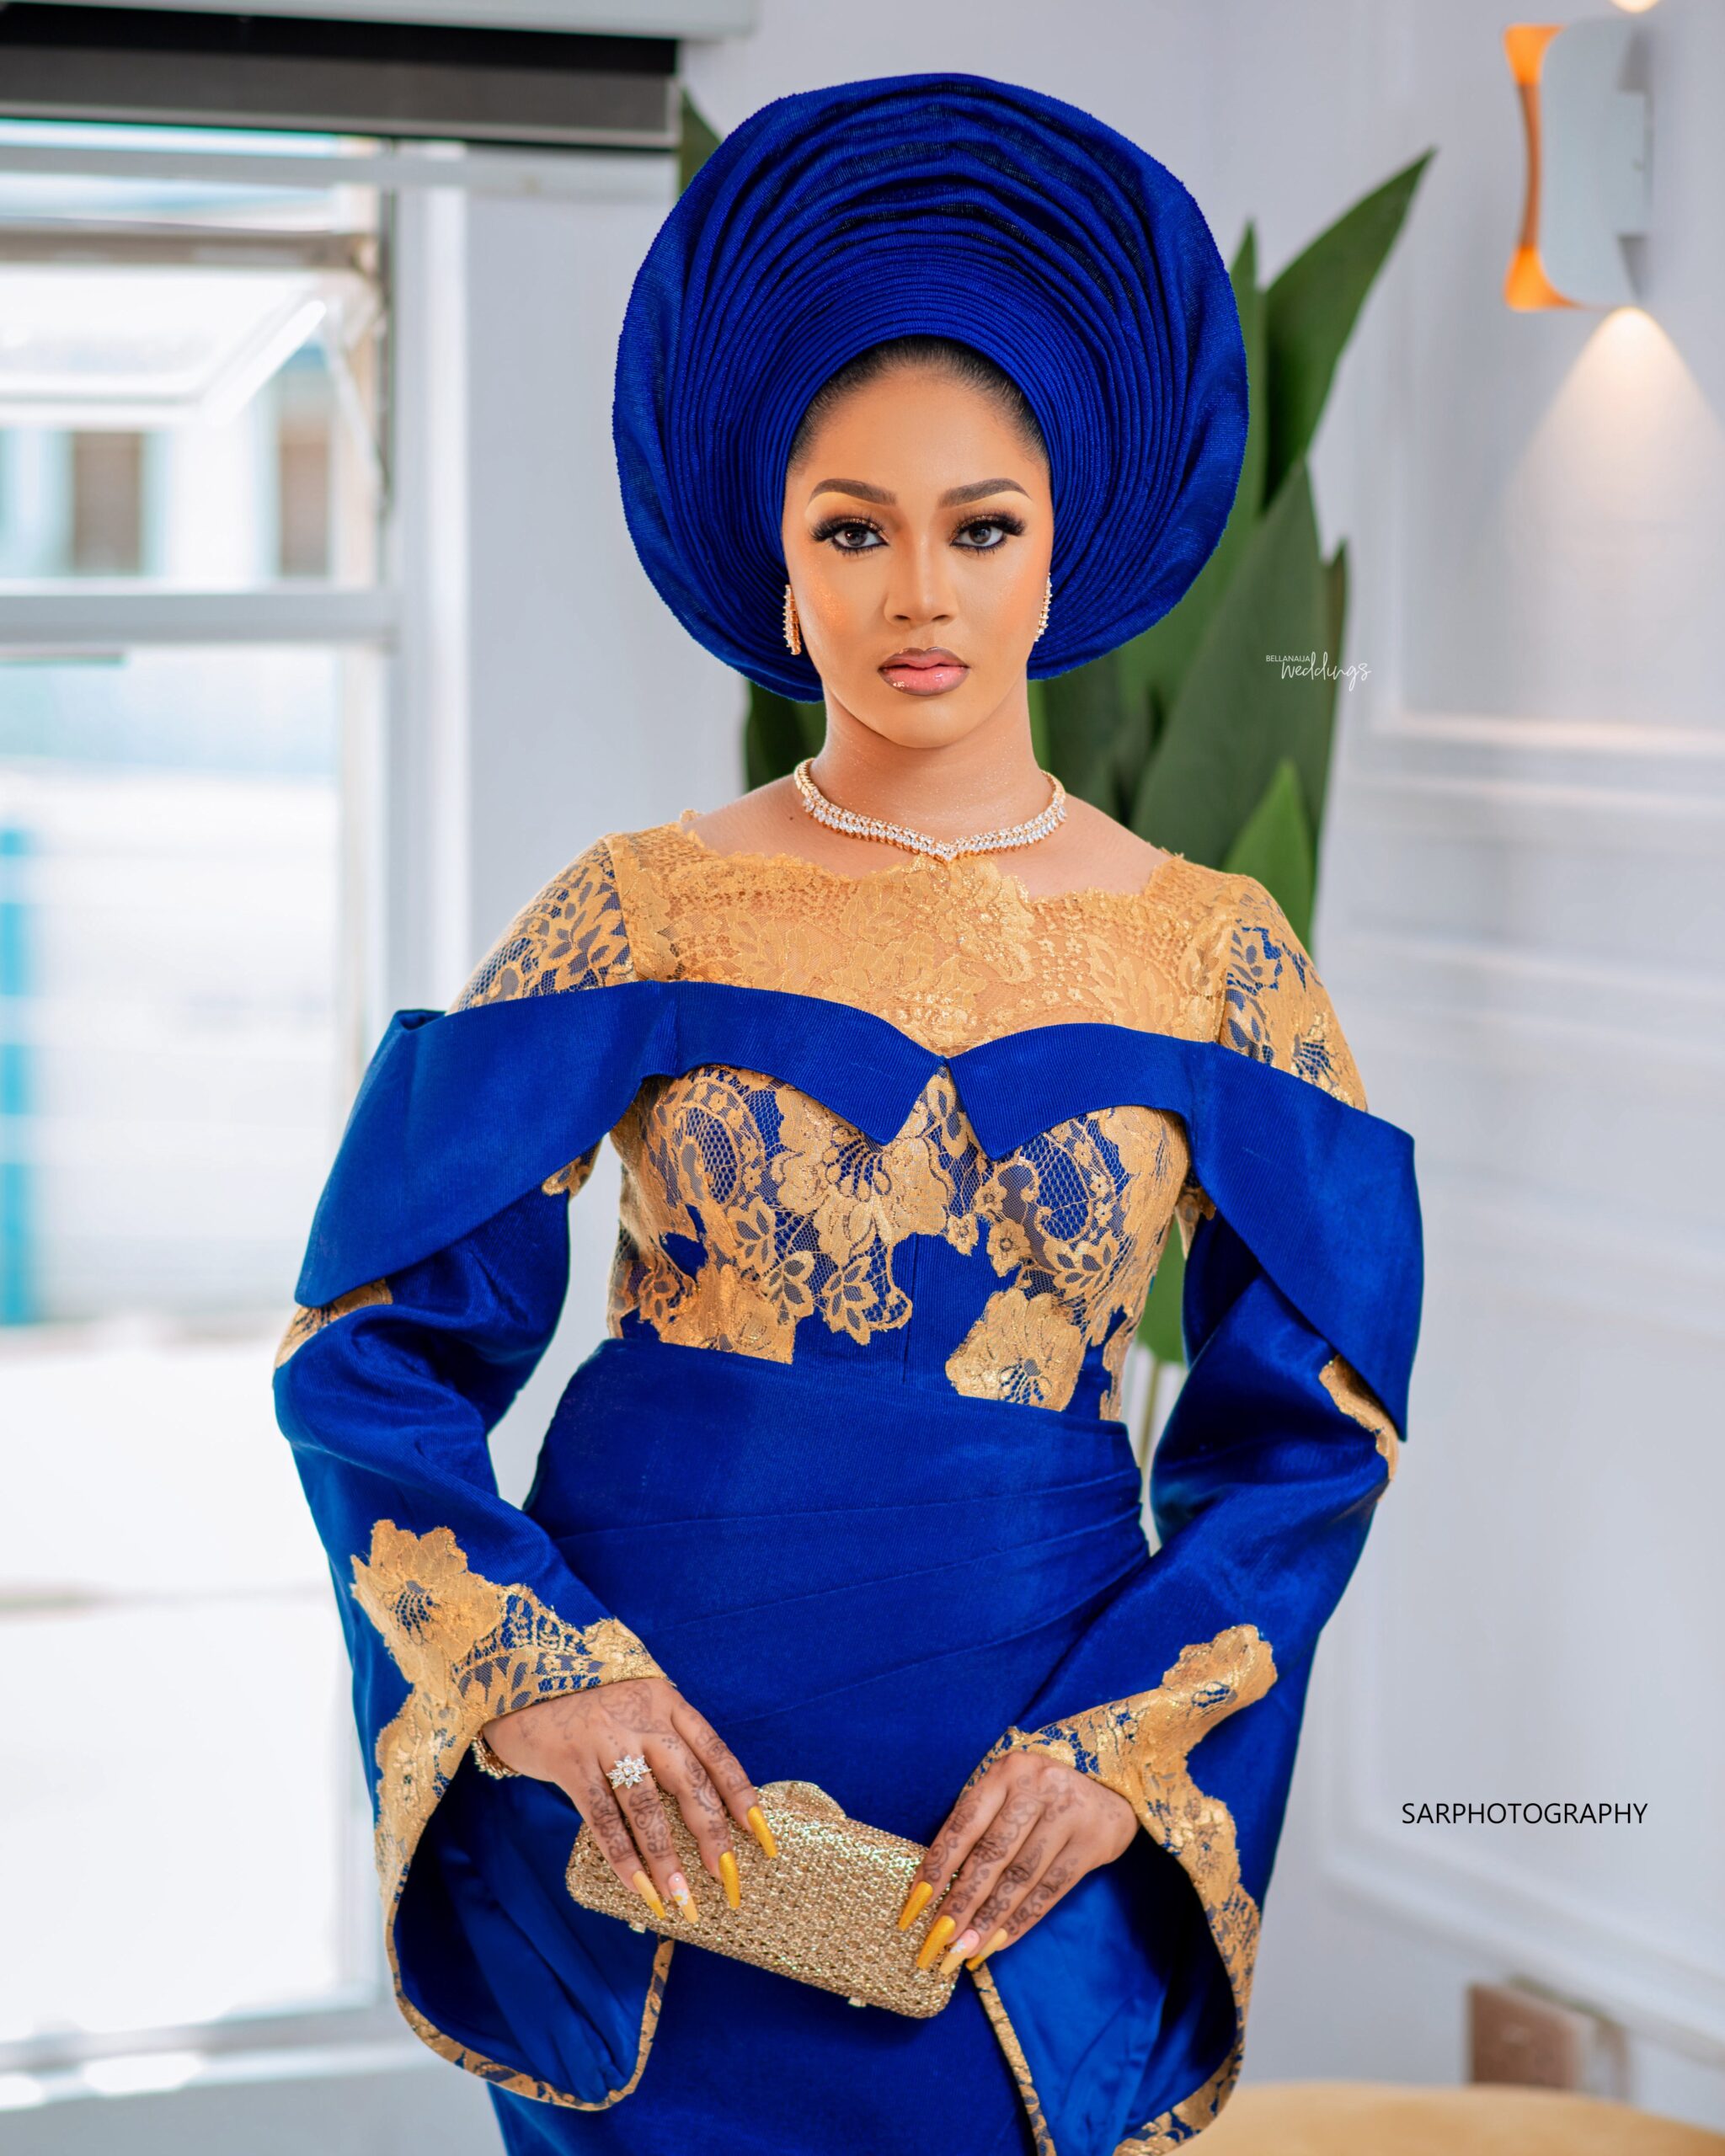 Go Royal & Elegant on Your Trad With This Beauty Look